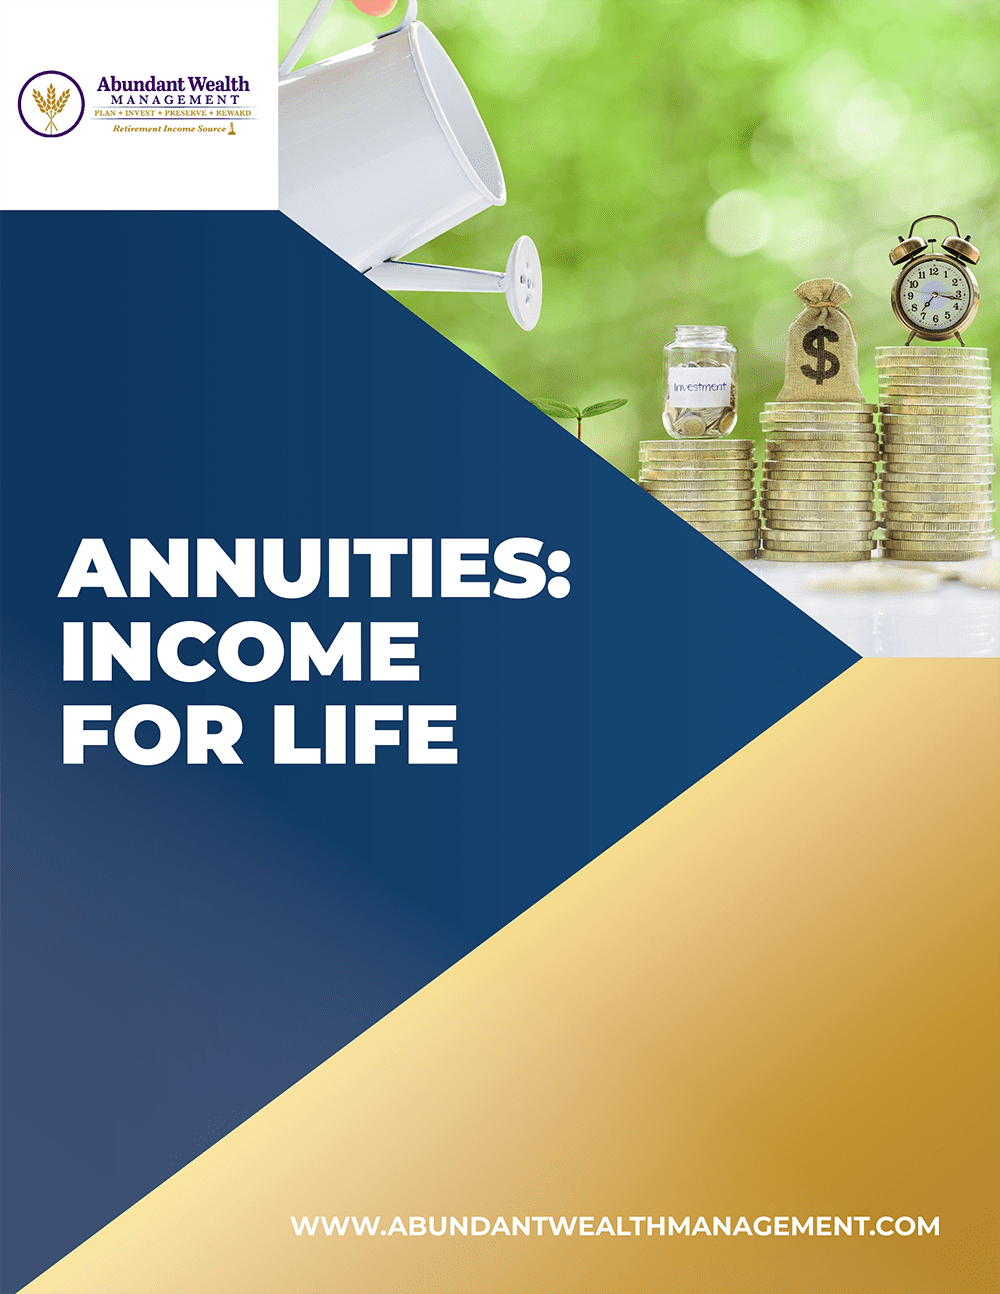 Abundant Wealth Management - Annuities-Income for Life-1